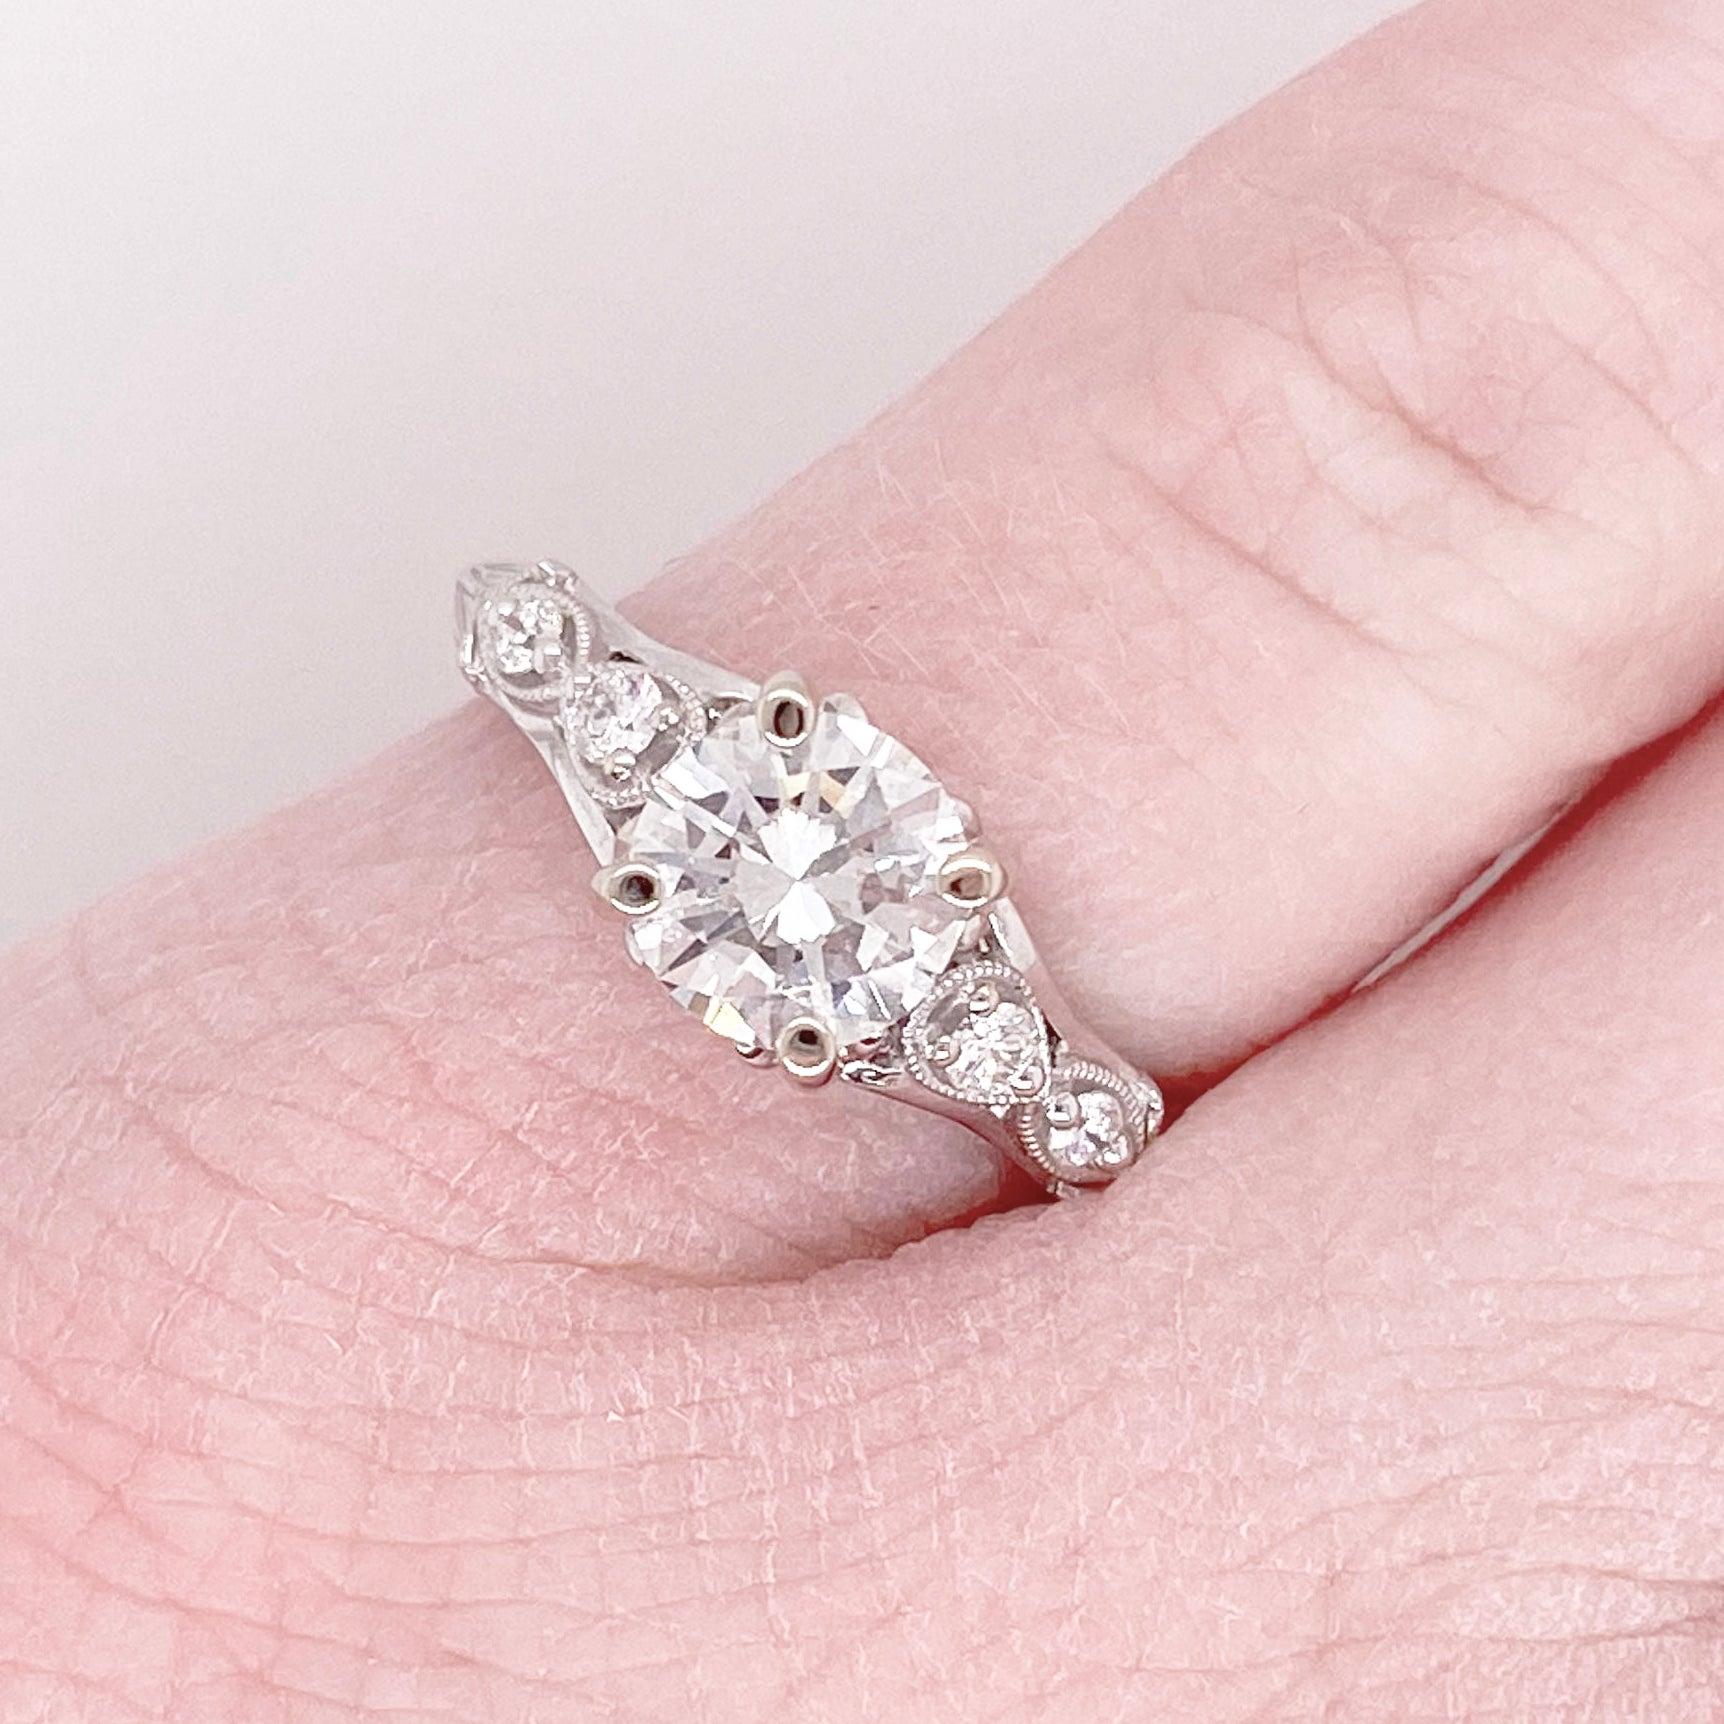 For Sale:  1 Carat Diamond Engagement Ring, White Gold, Round, Vintage, Detailed 2